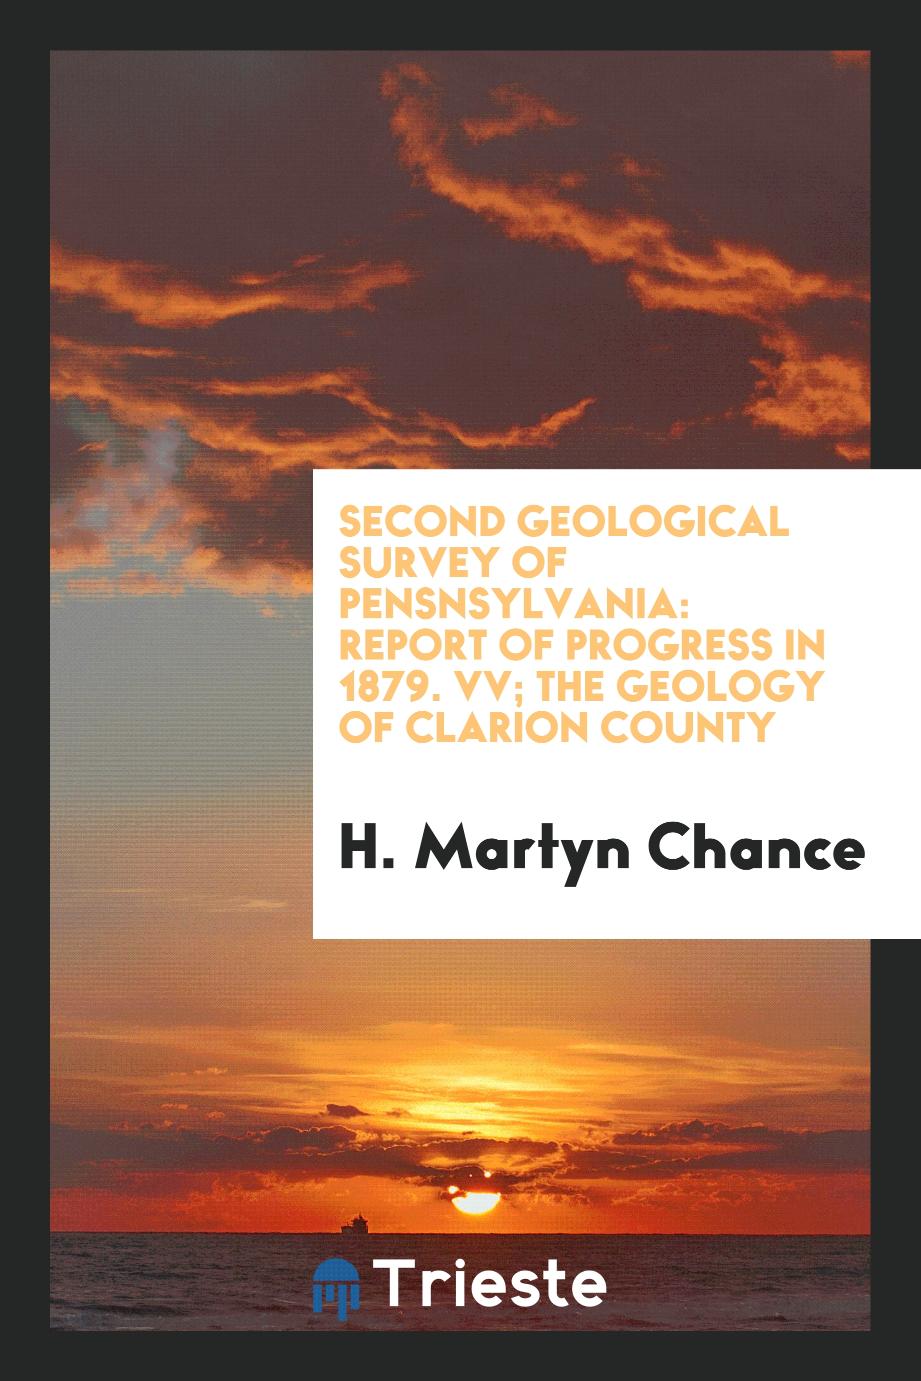 Second Geological Survey of Pensnsylvania: Report of Progress in 1879. VV; The Geology of Clarion County